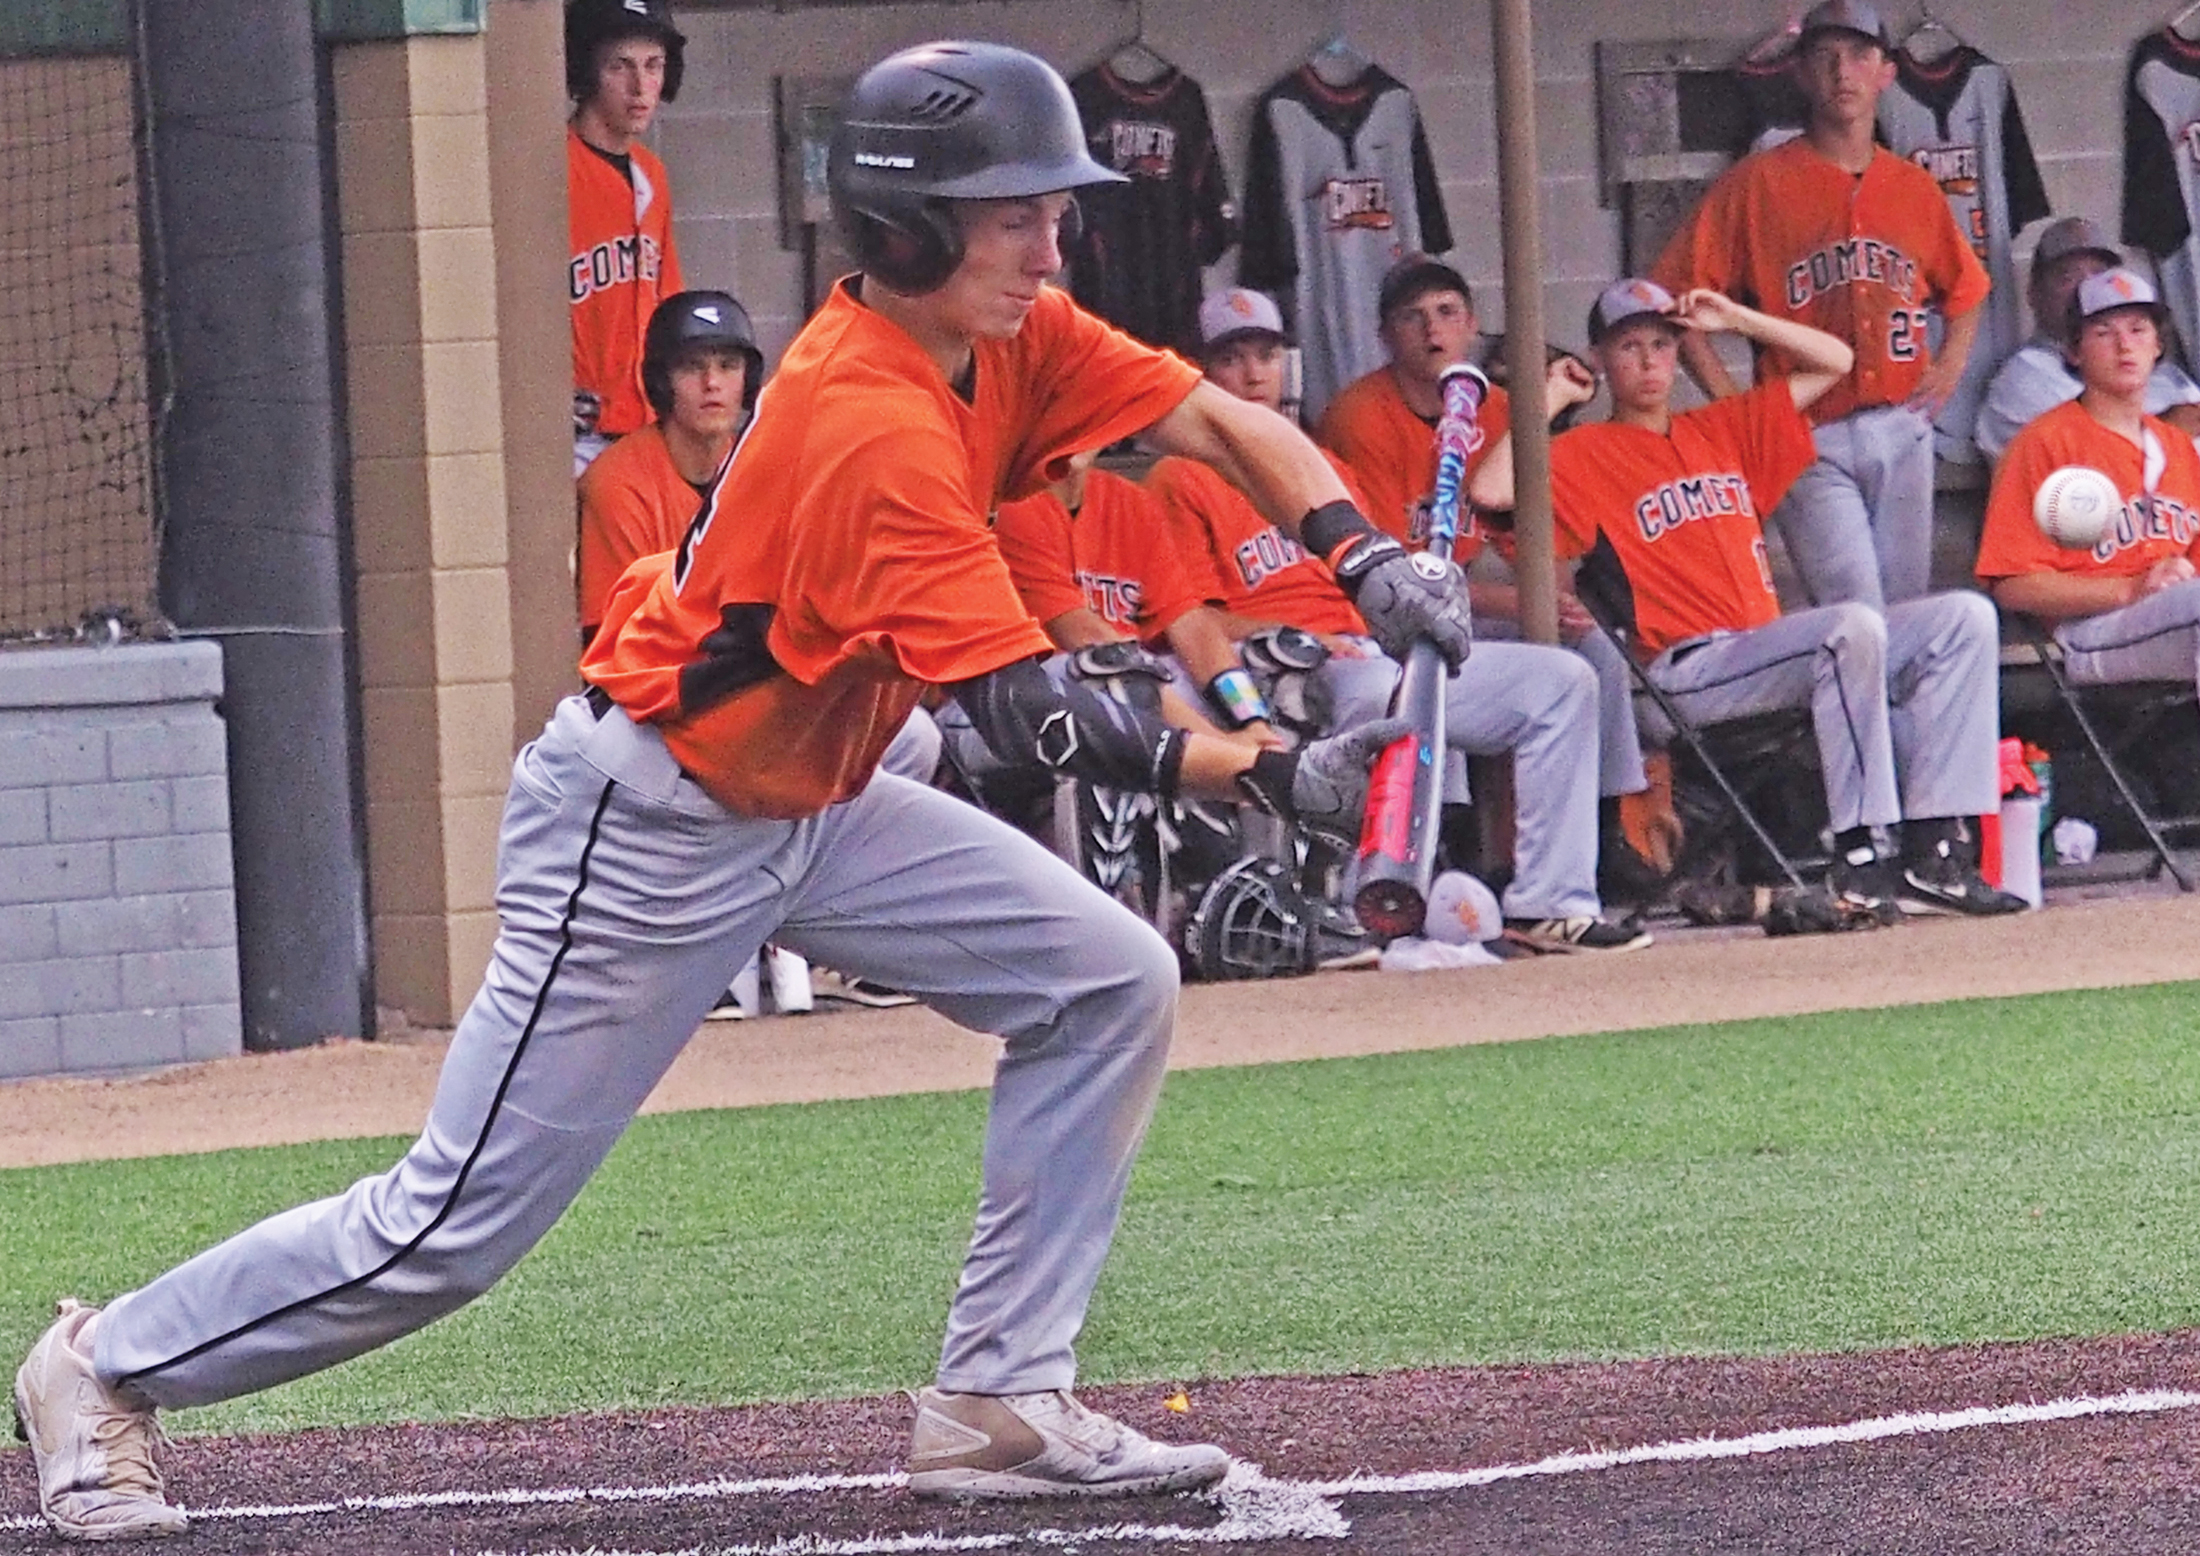 Big inning helps advance Comets to baseball substate final